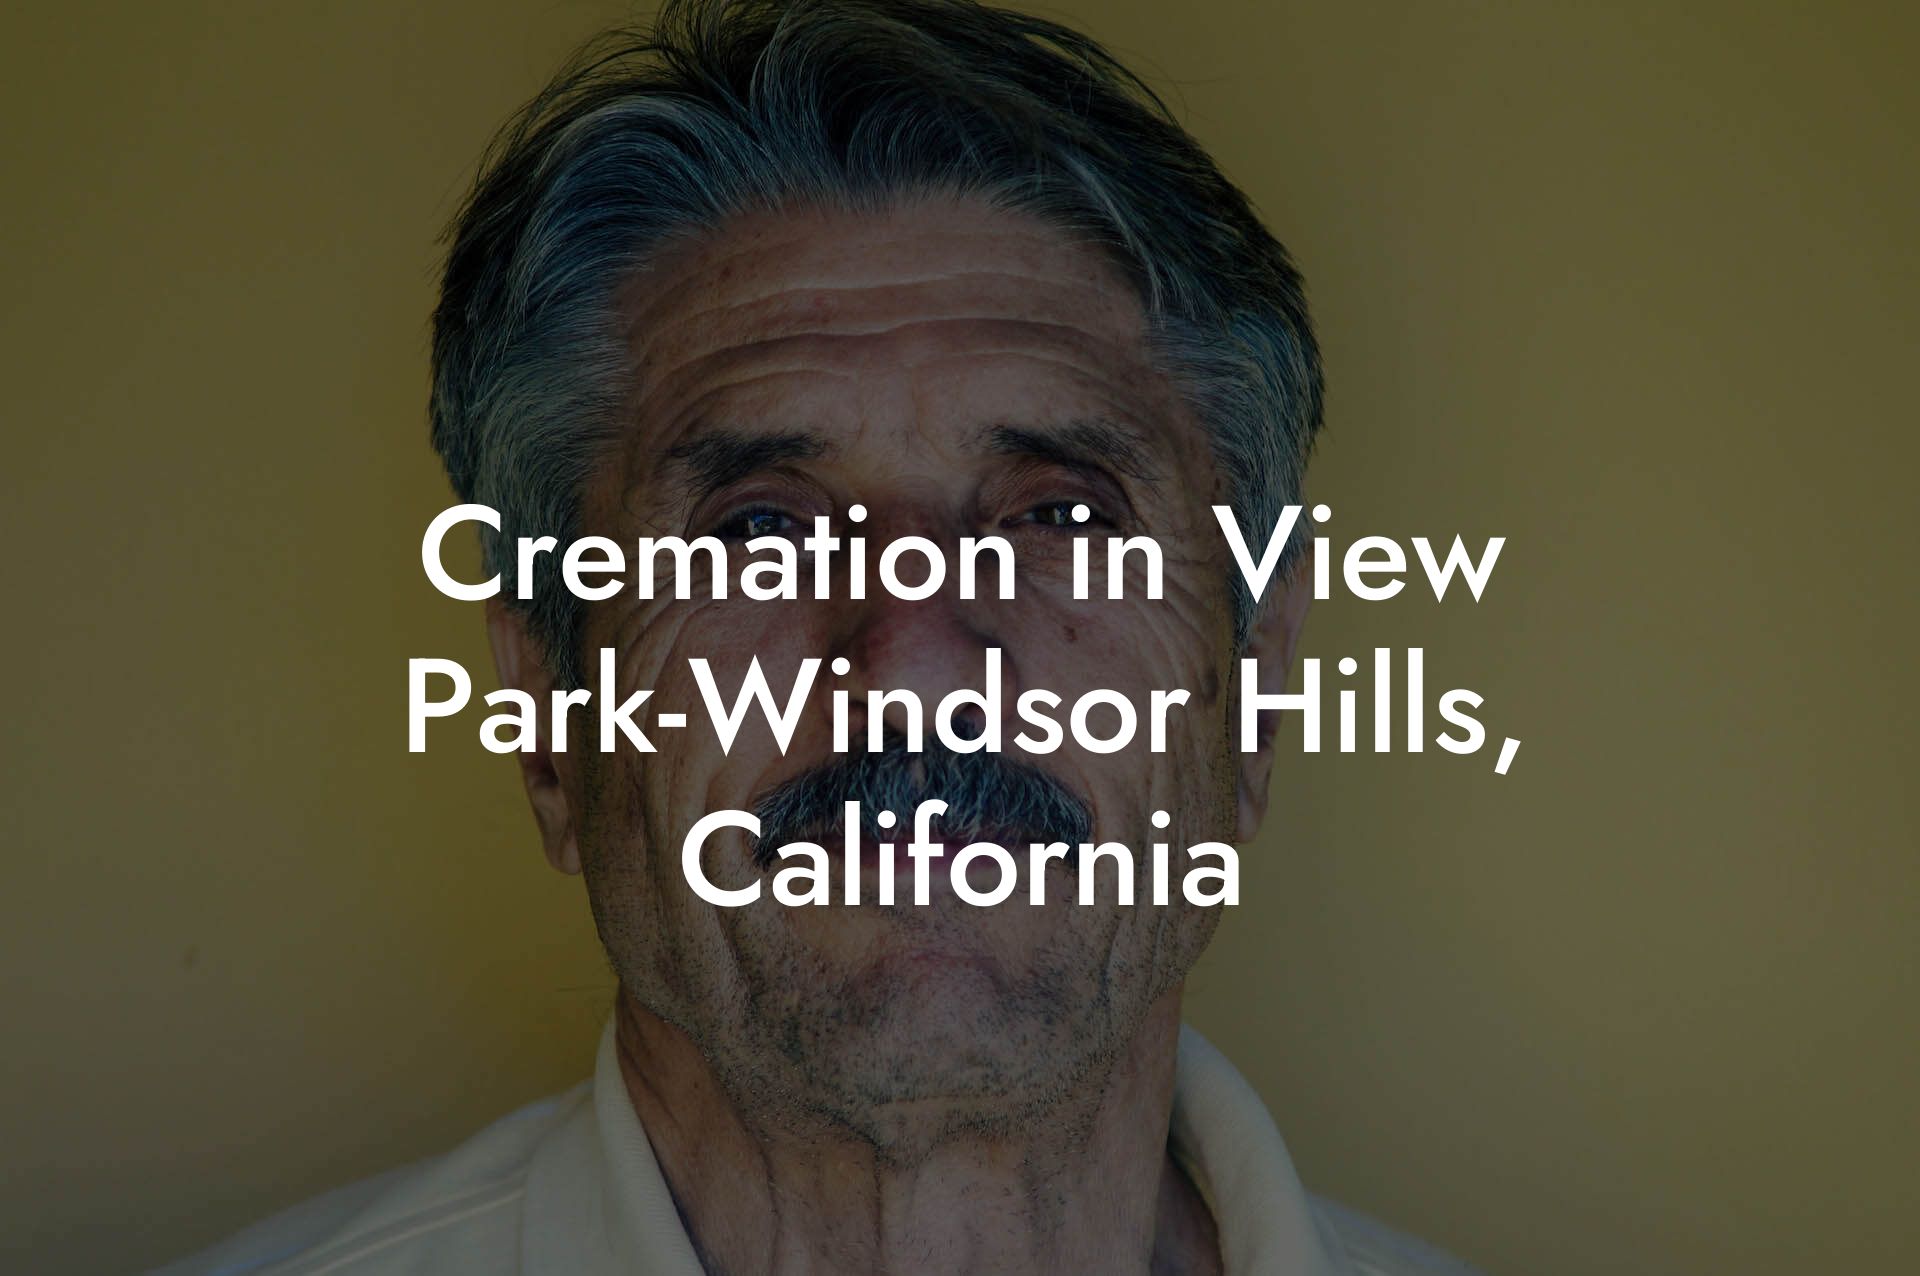 Cremation in View Park-Windsor Hills, California